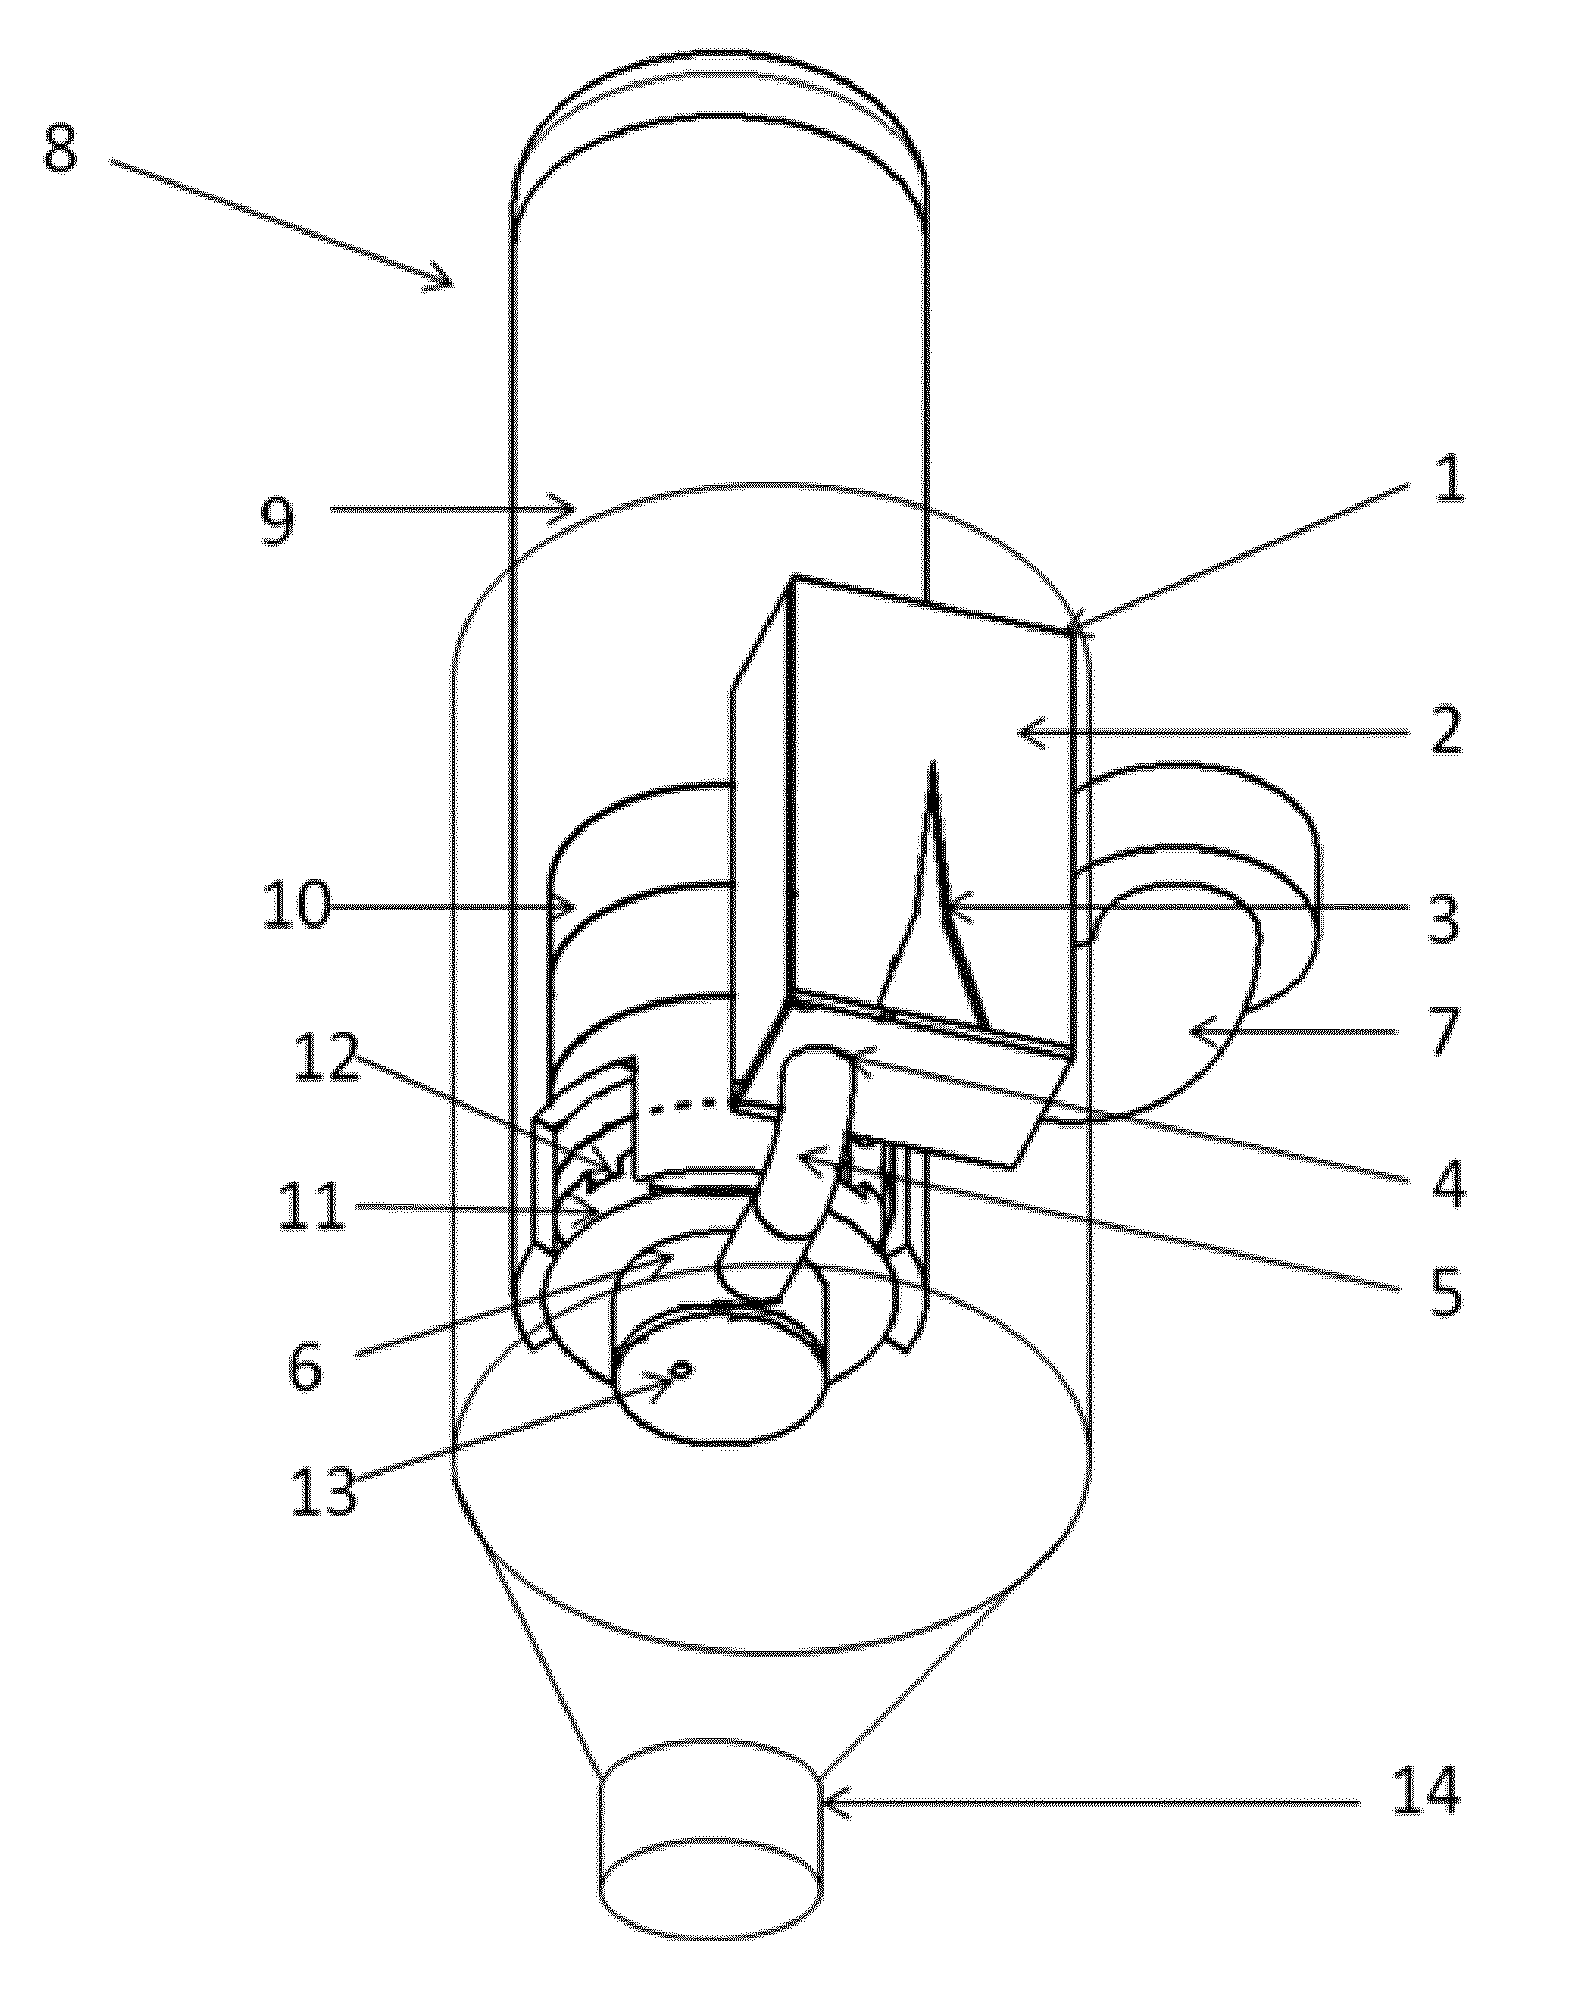 Dietary supplement dosing device